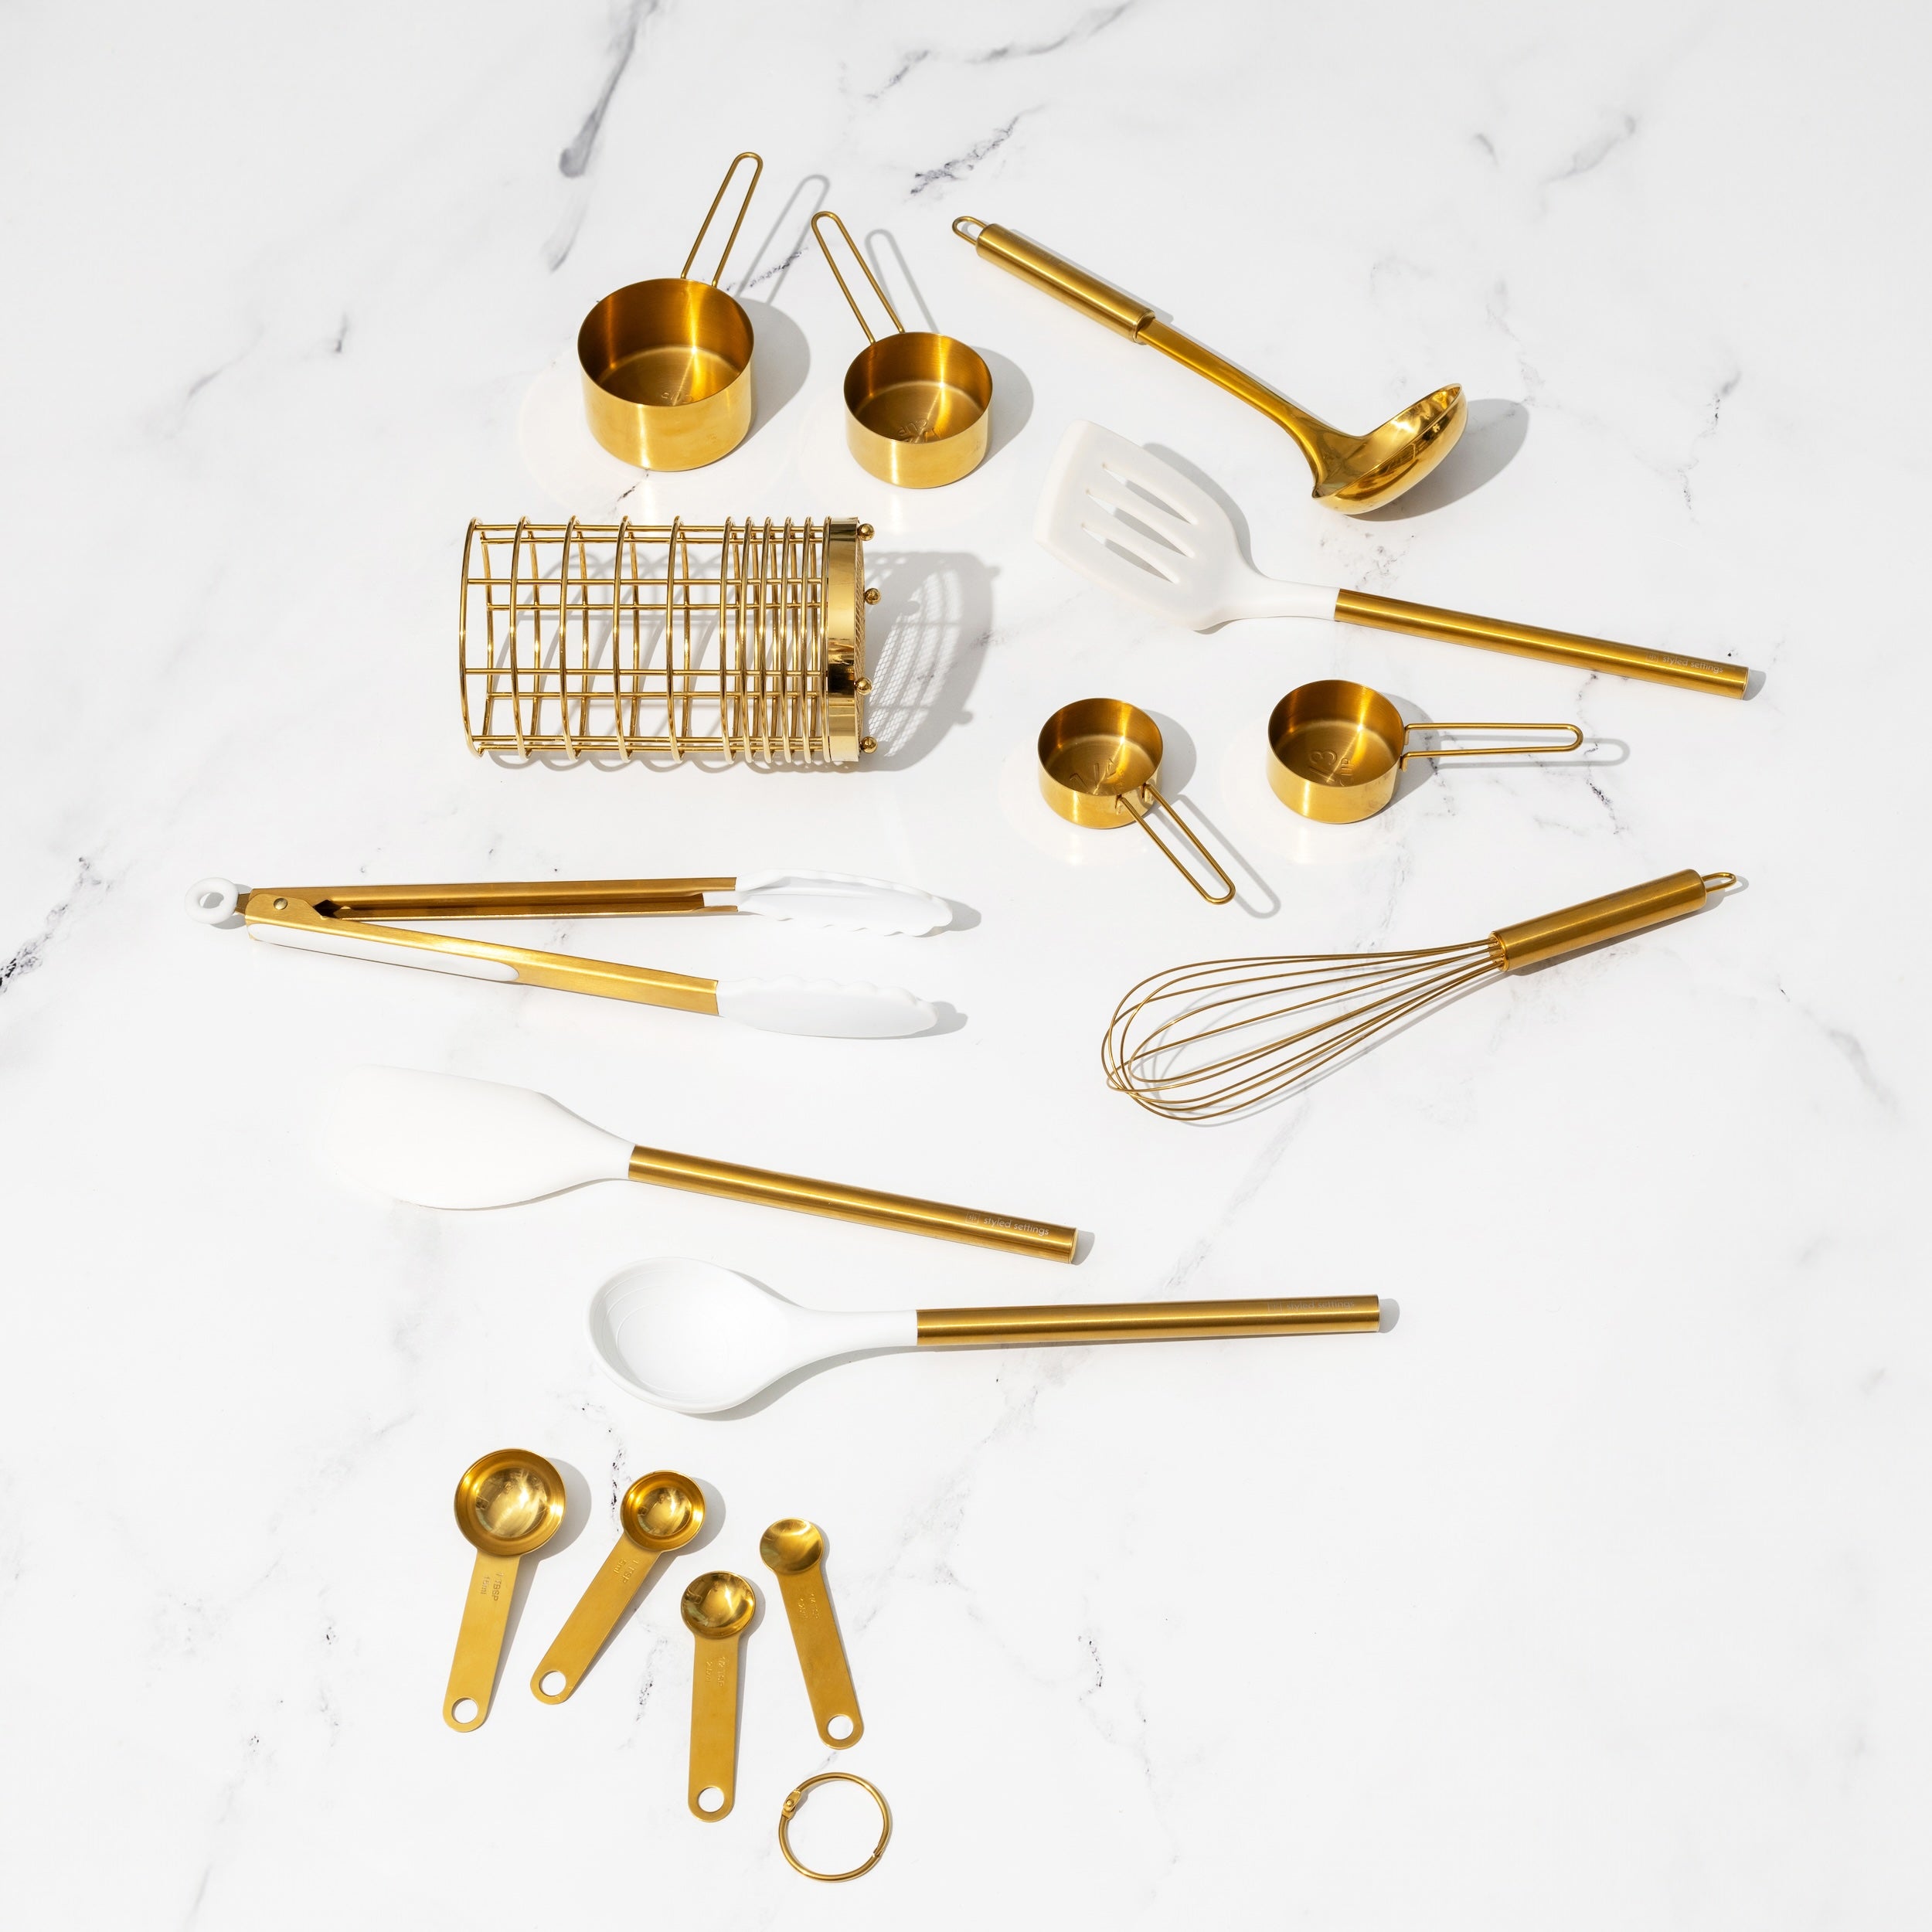 White and Vintage Gold Kitchen Utensils Duo